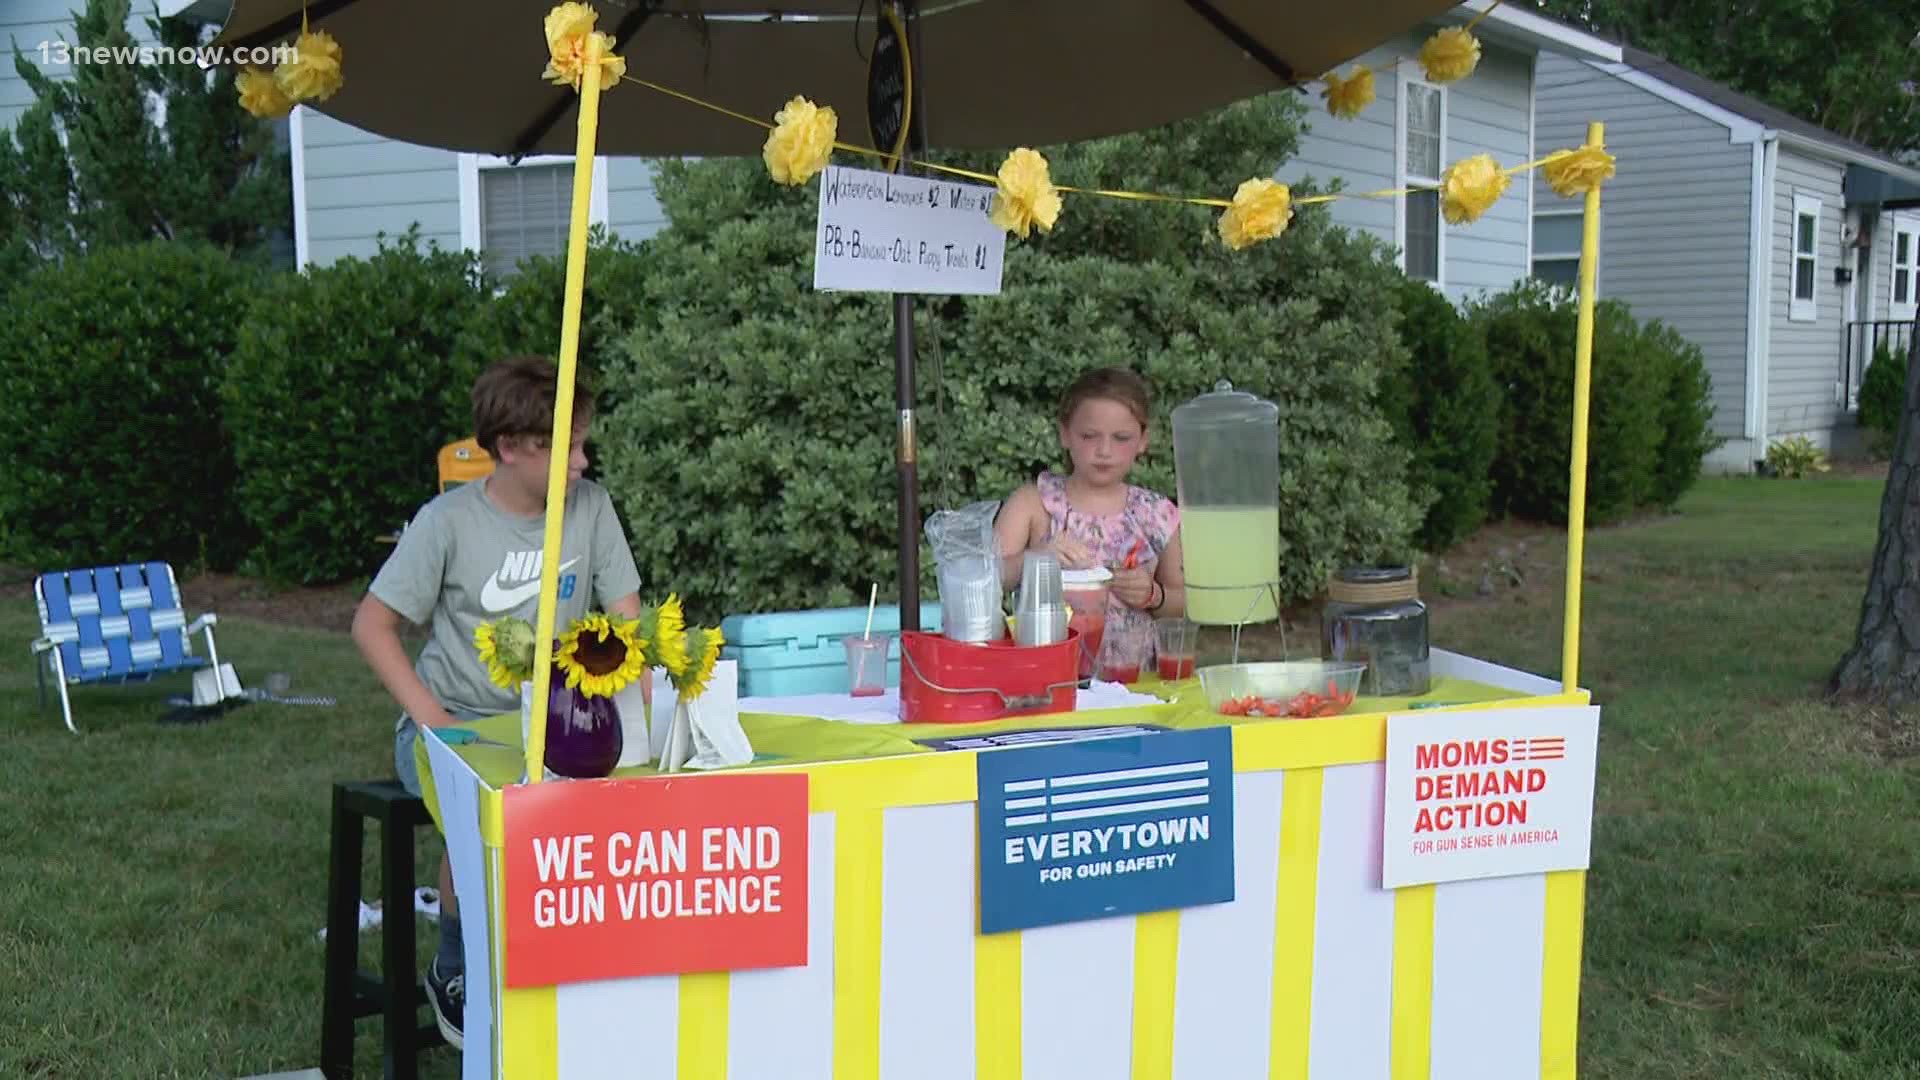 The Johnson family put together a lemonade stand to raise money for "Moms Demand Action."